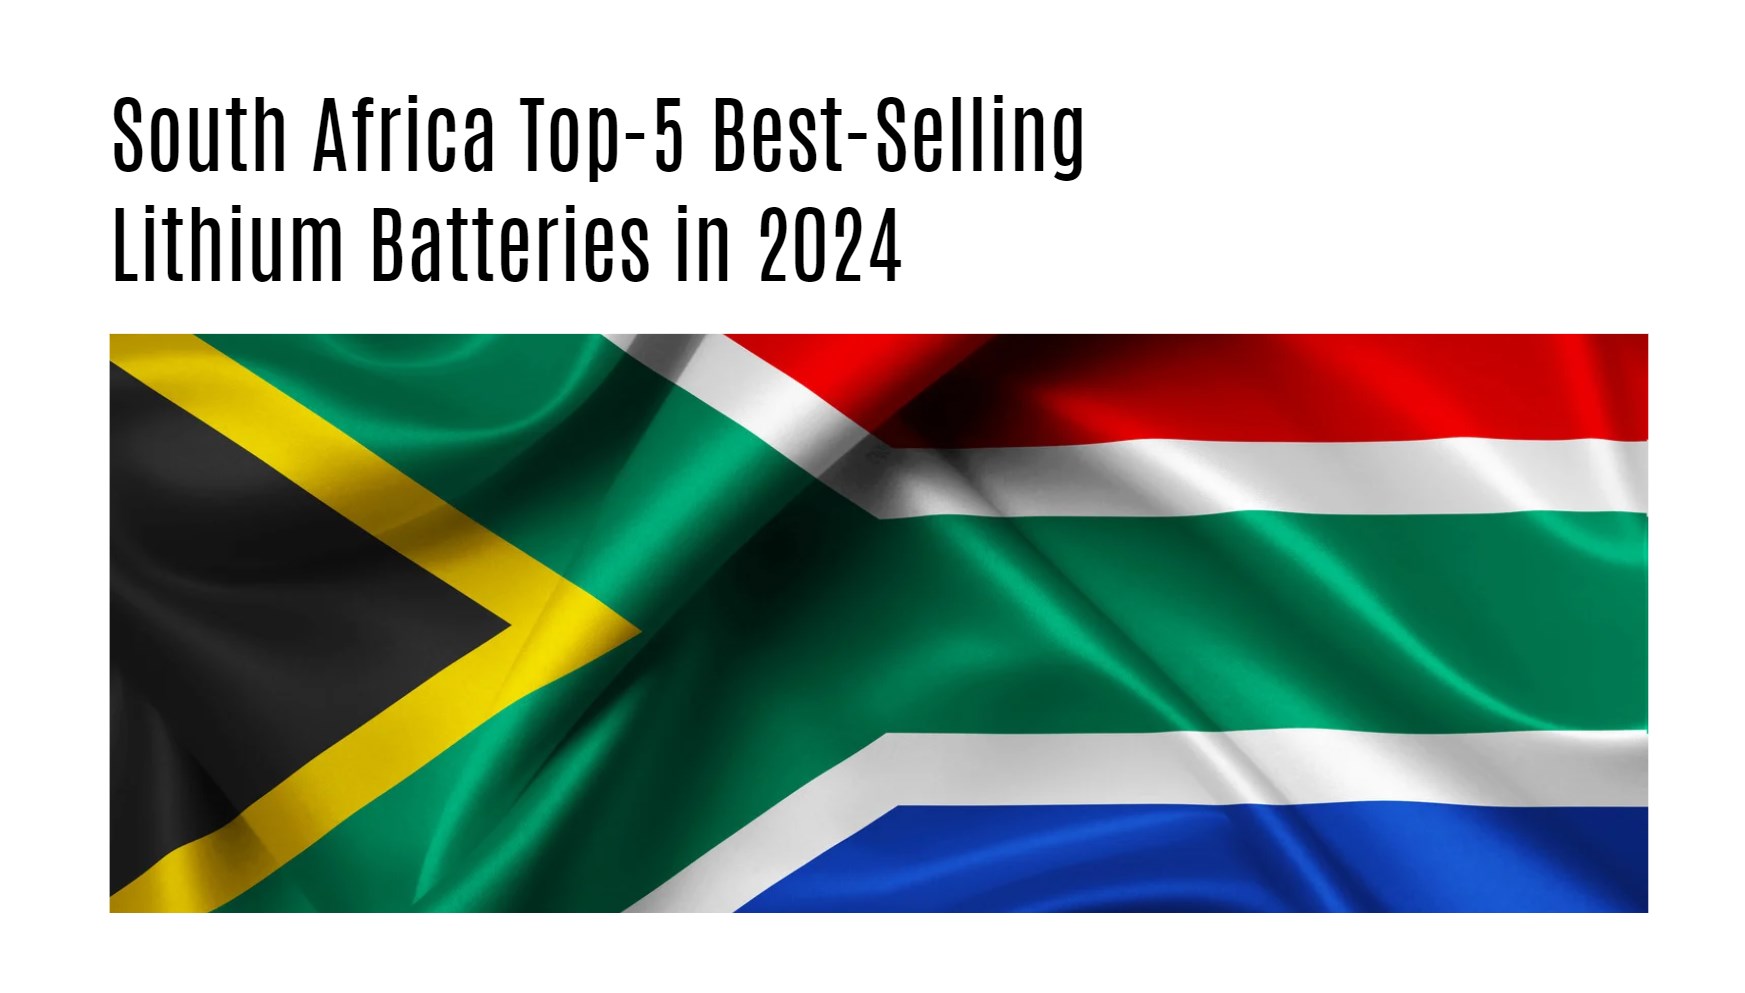 South Africa Top-5 Best-Selling Lithium Batteries in 2024